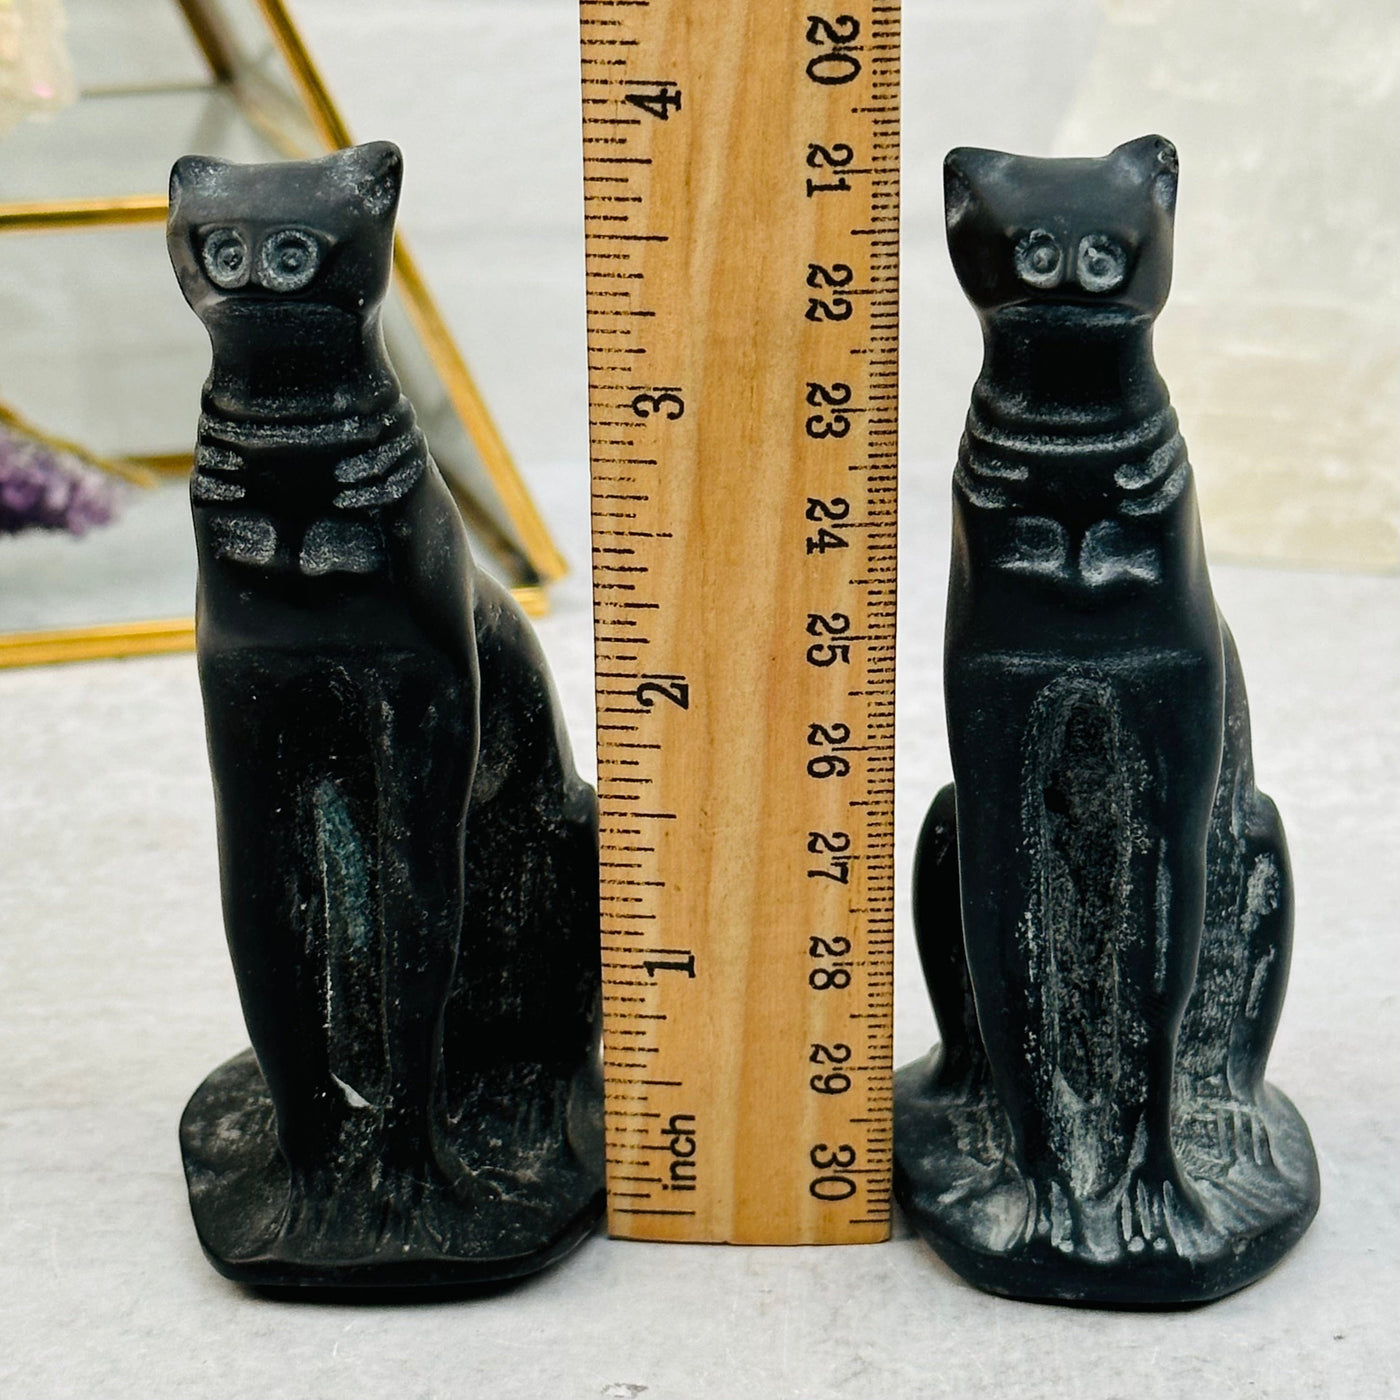 Black Obsidian Cat next to a ruler for size reference